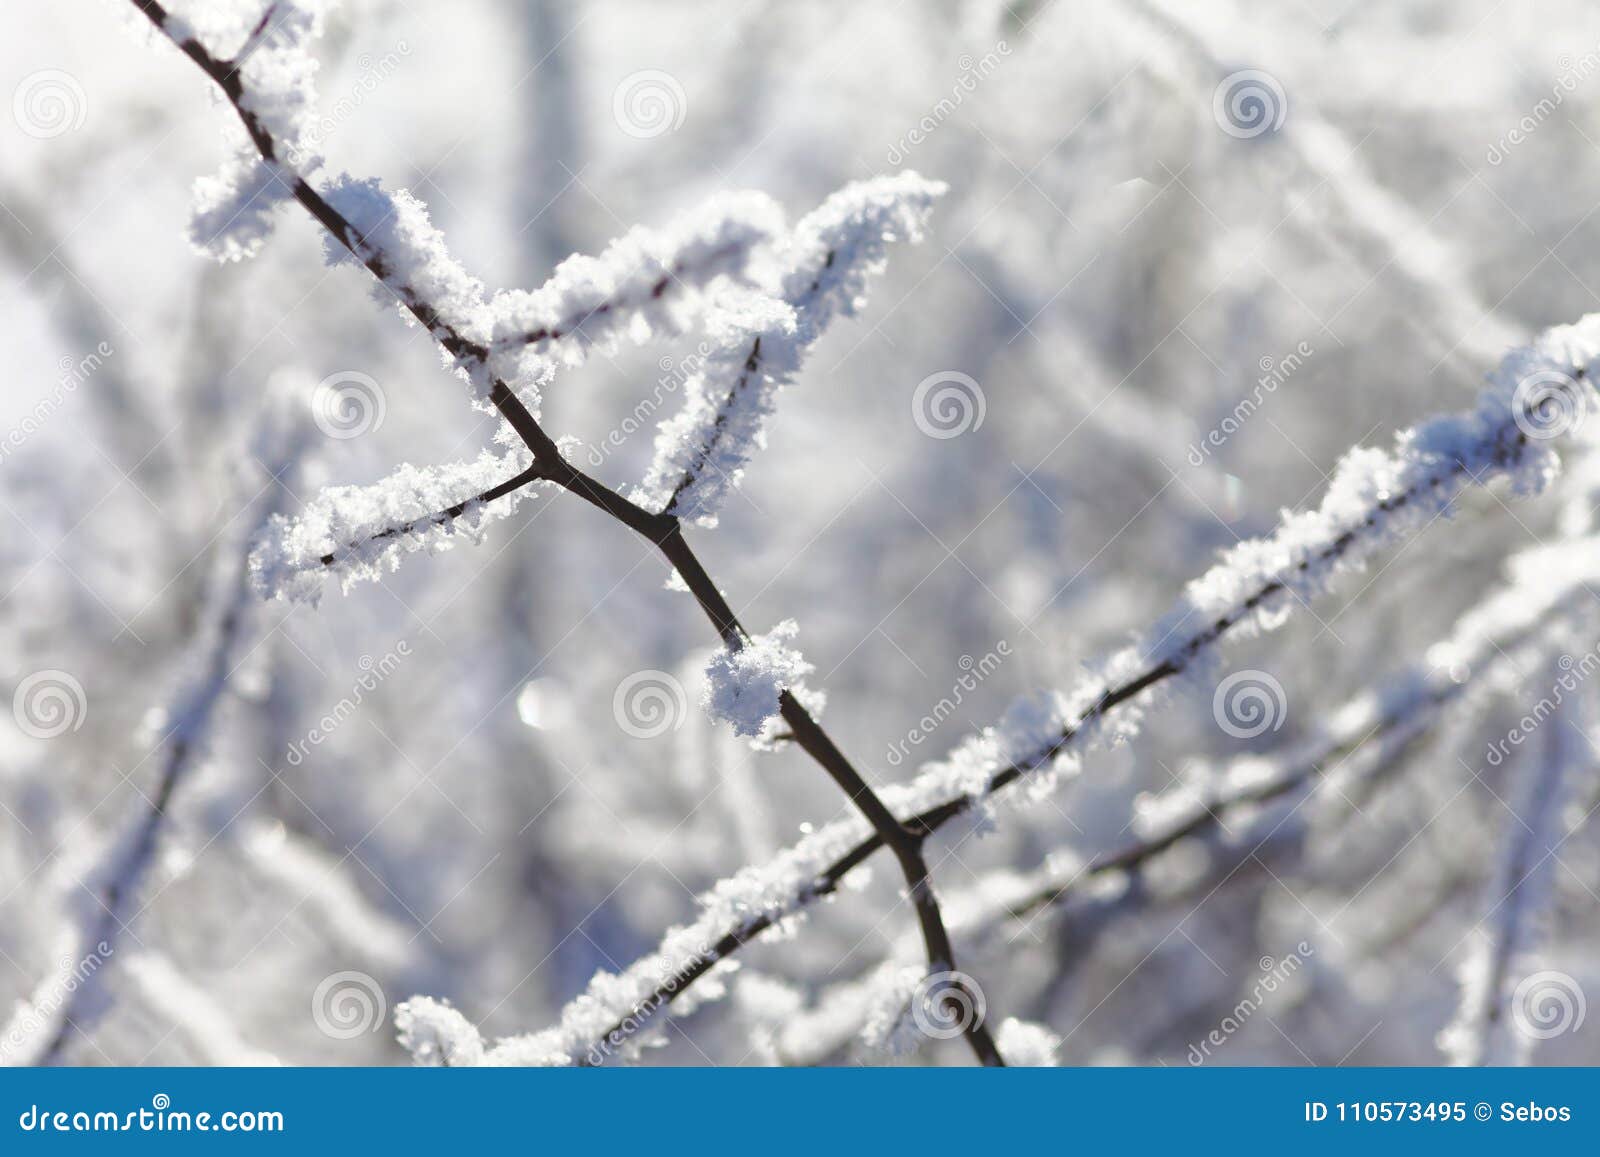 Close Up of Bush Branches Under the Cap of Snow. Tinted Photo. Stock ...